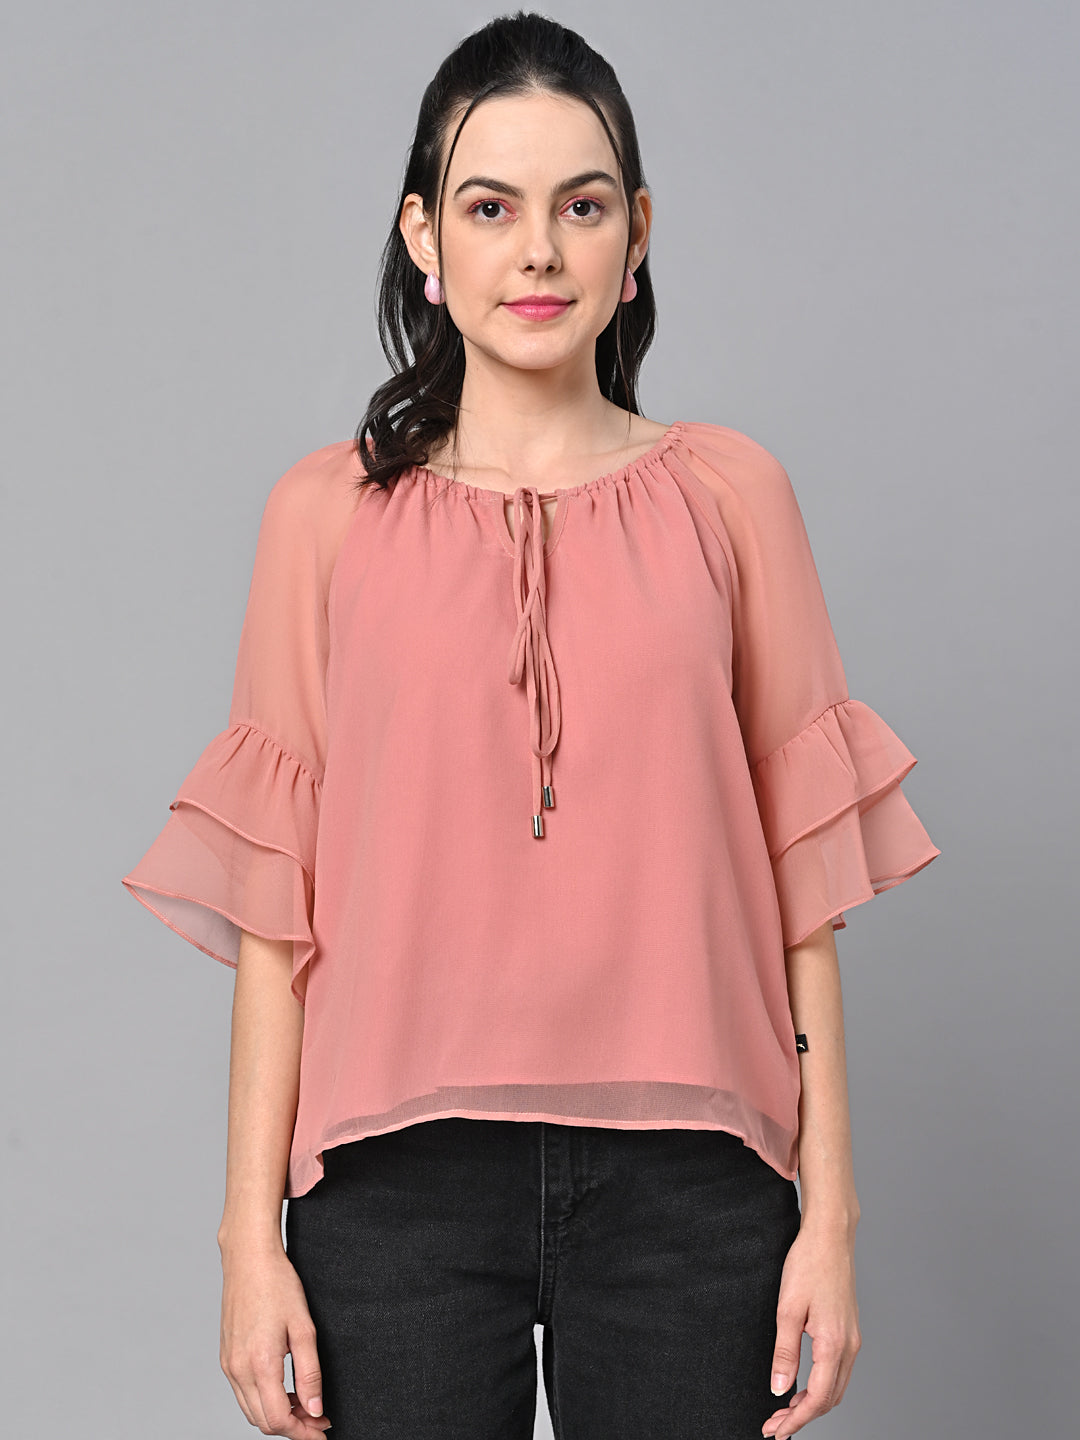 Valbone Women’s Peach Color Solid Top With Half-Sleeves